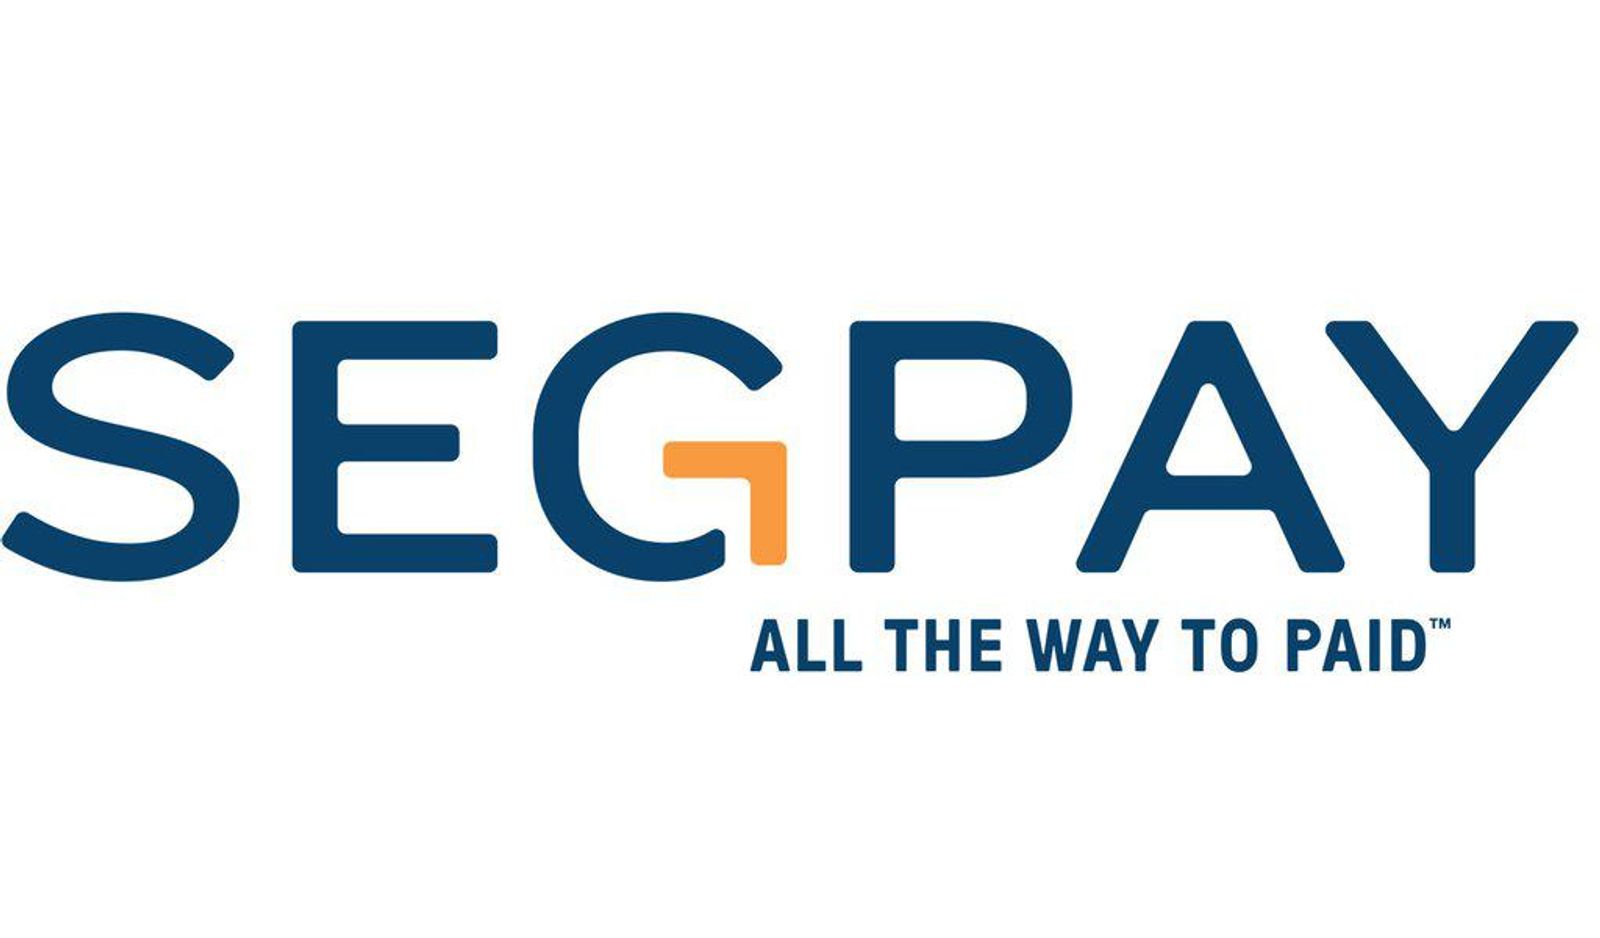 Segpay Completes the Circuit With Model/Affiliate Payout Platform